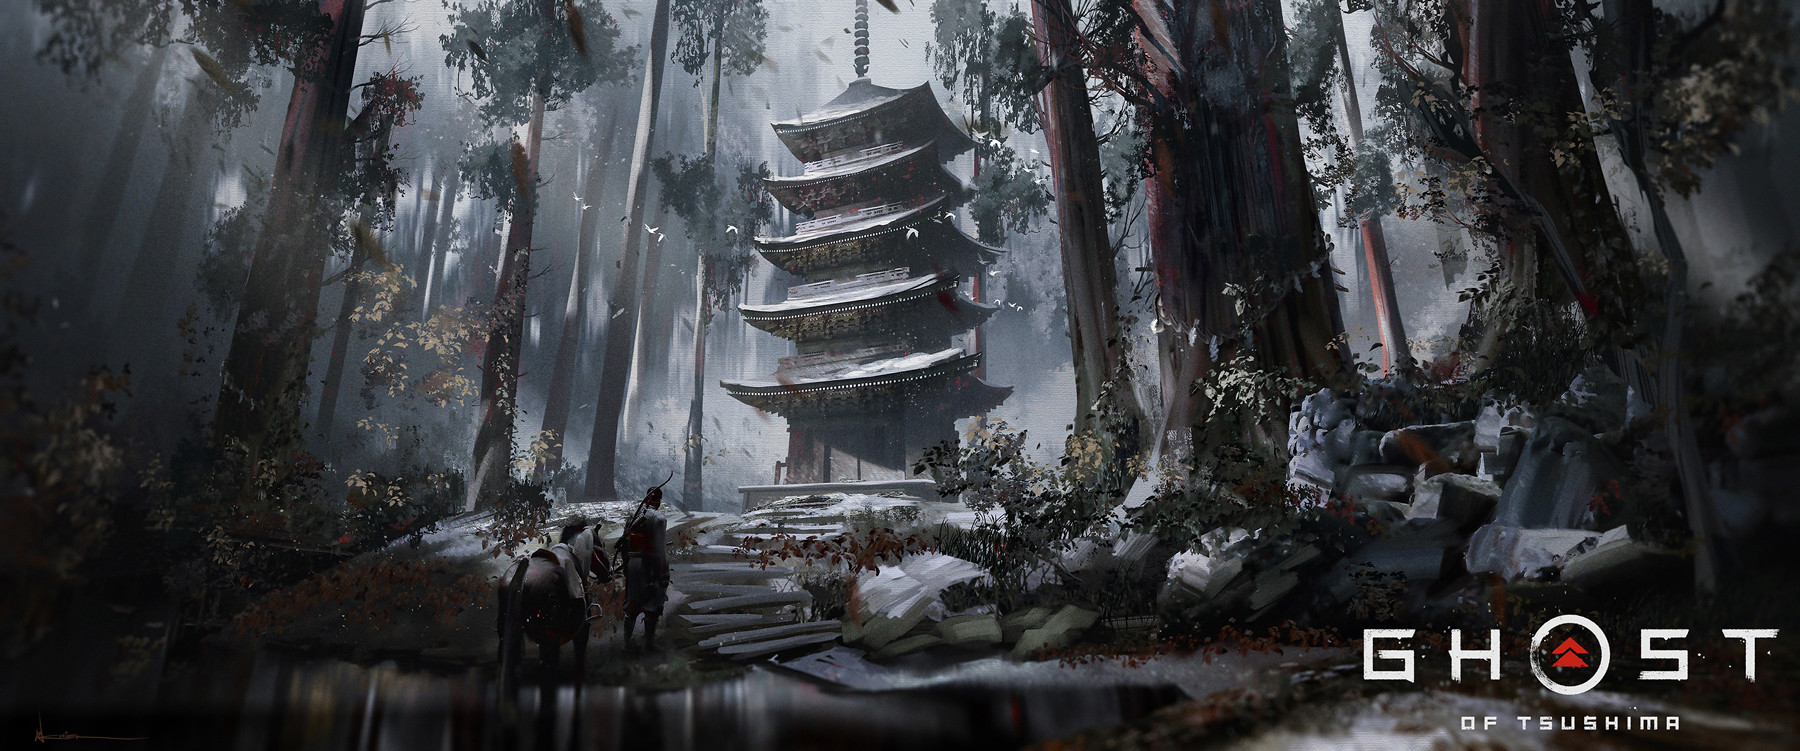 Image] Cover concept art i made for Ghost of Tsushima